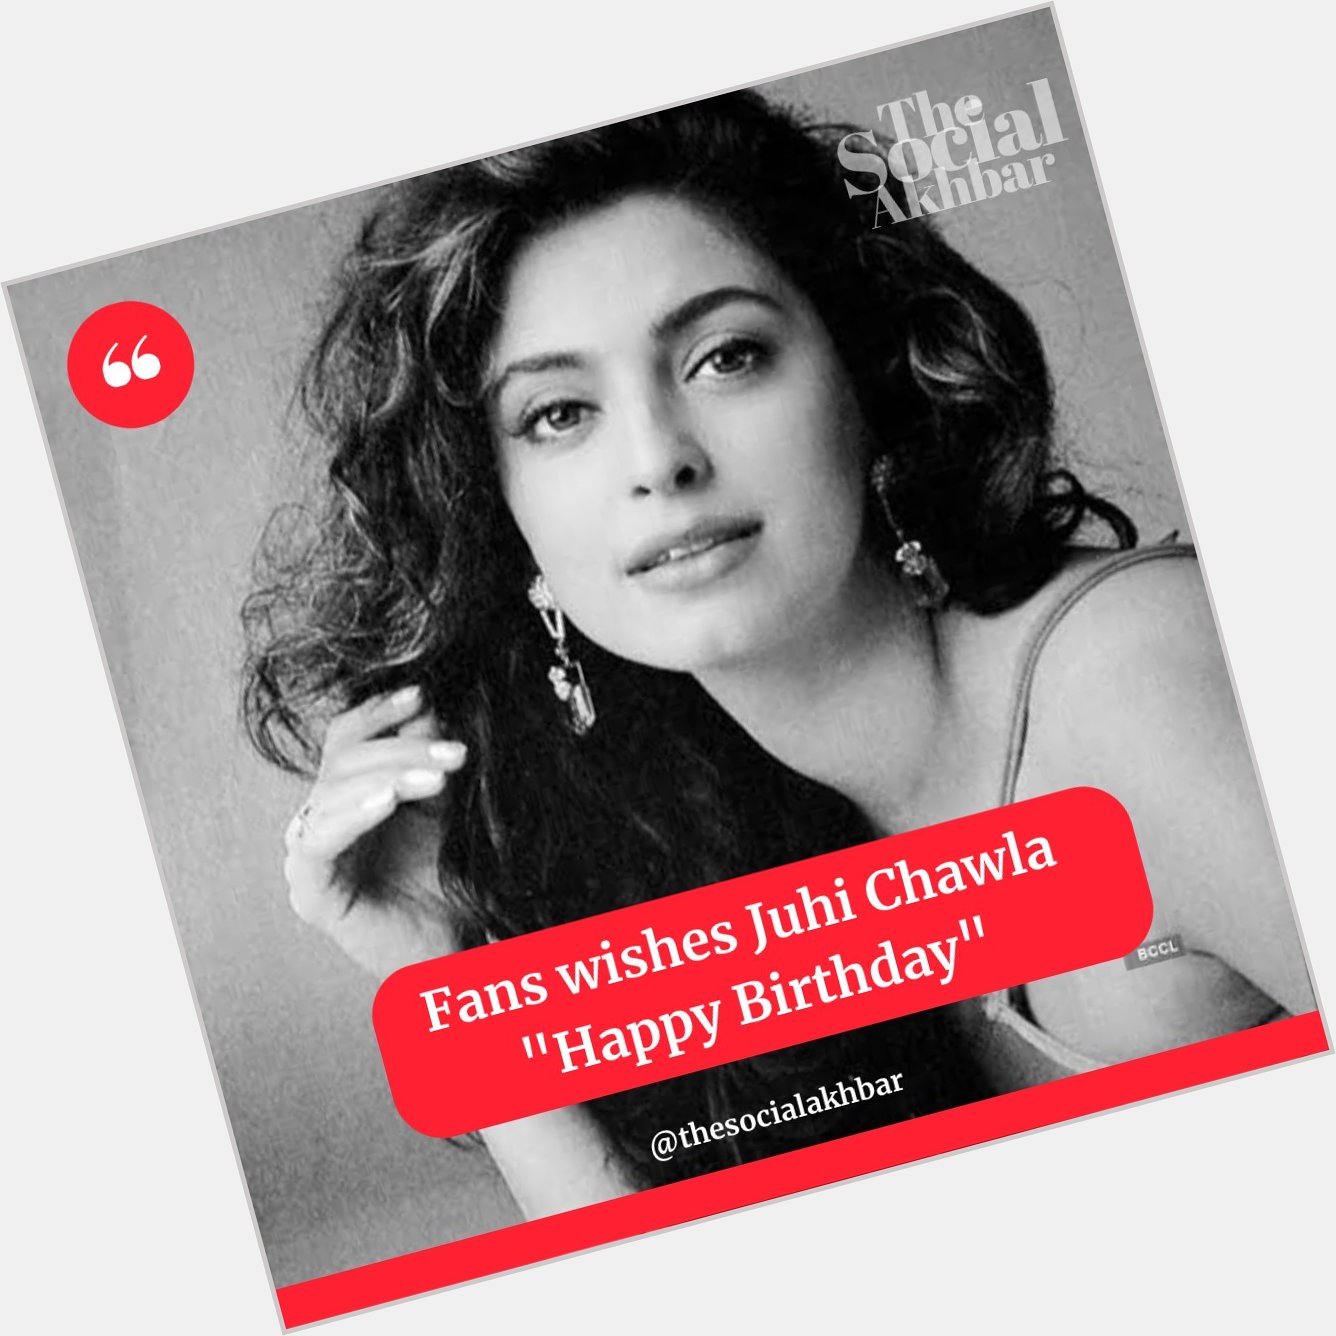 Juhi Chawla turned 55 today, fans wish her Happy Birthday and blessings!!  